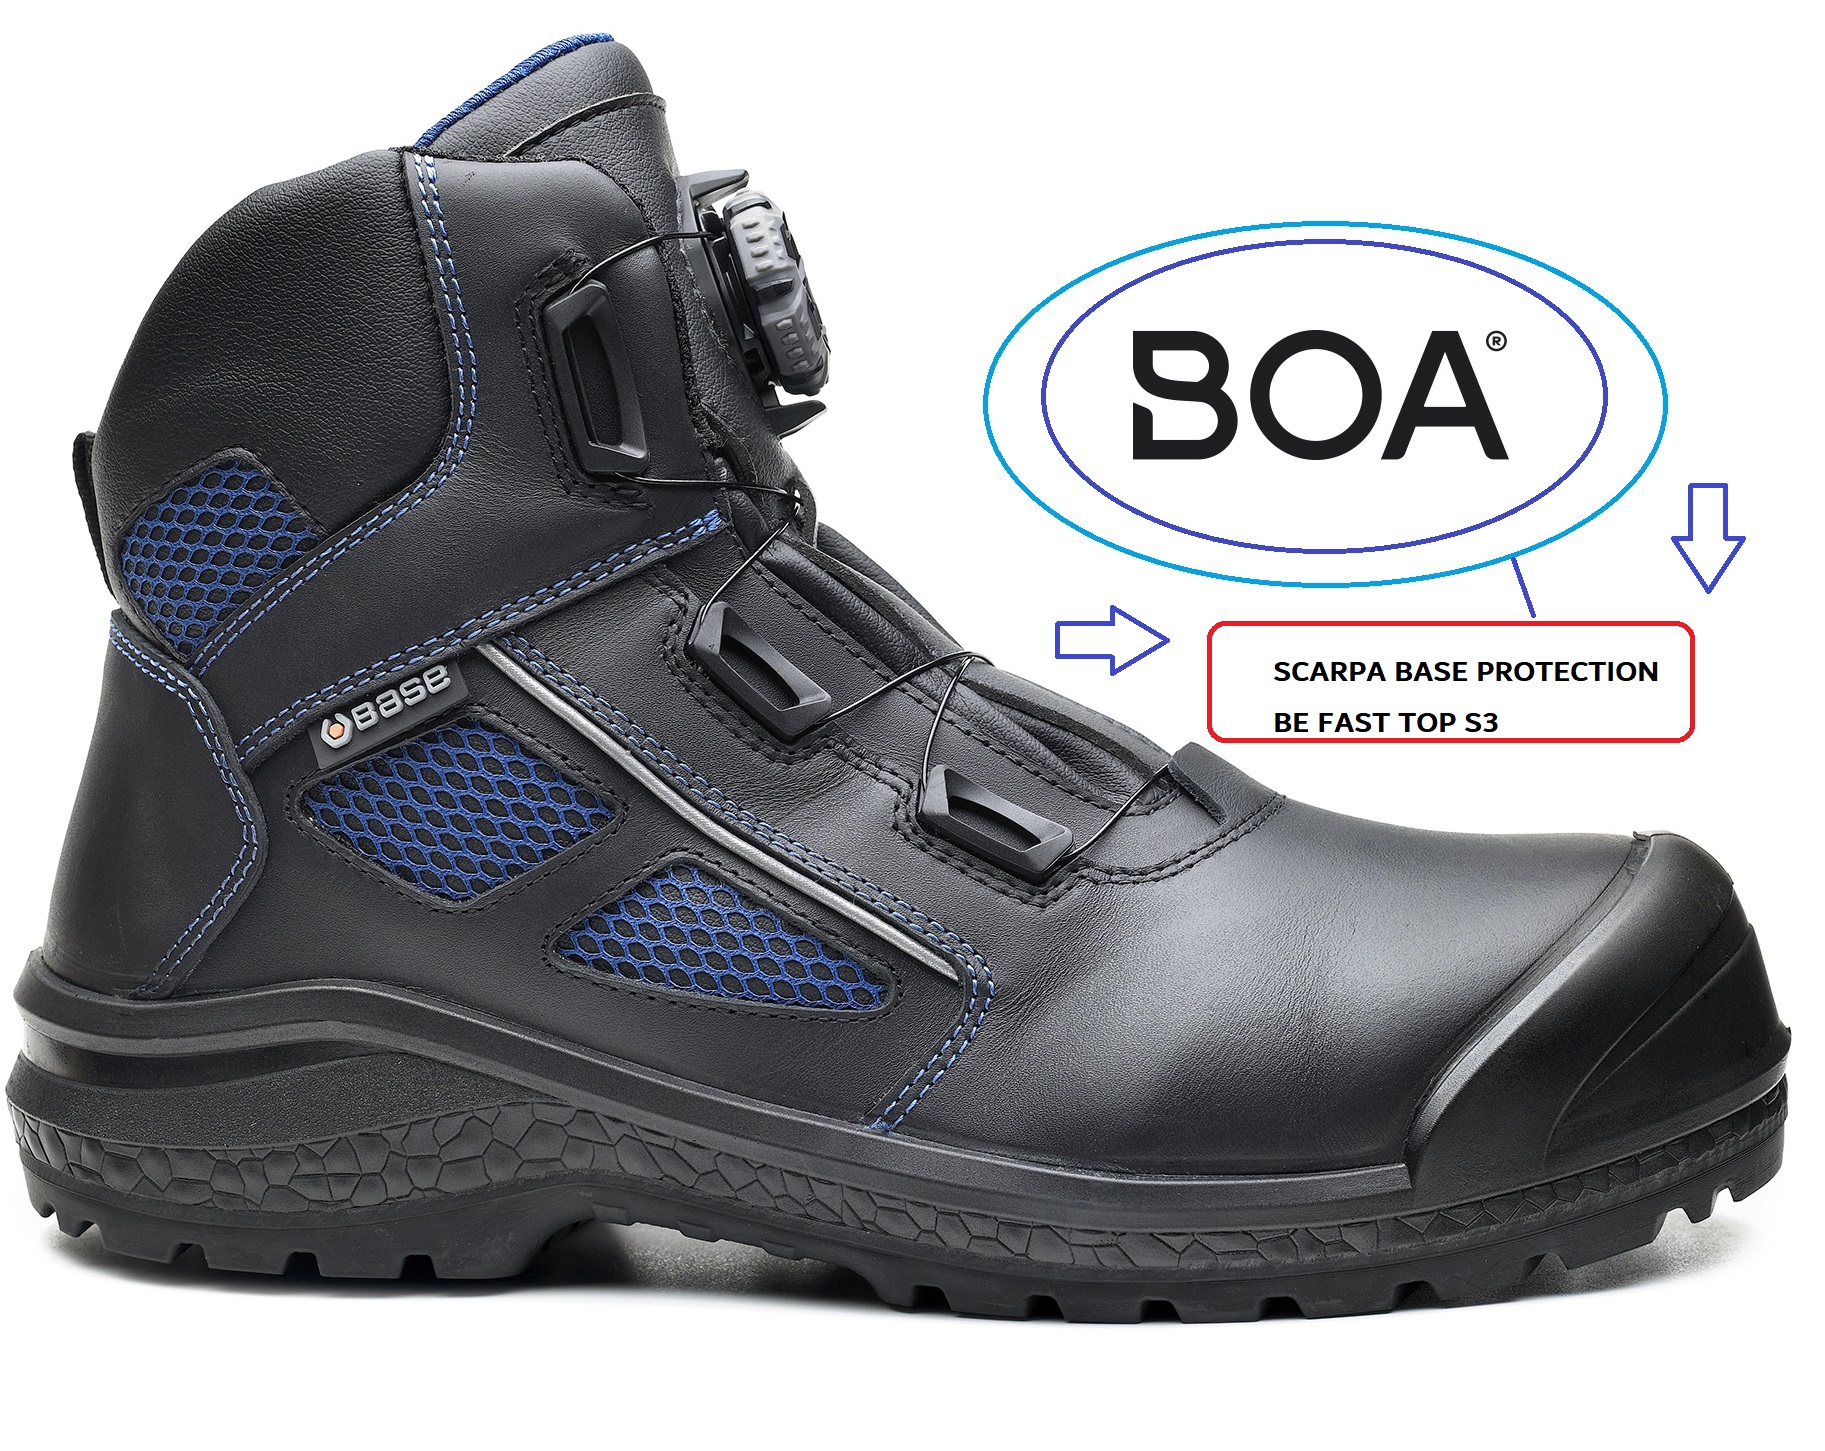 SCARPA BASE PROTECTION BE FAST TOP S3